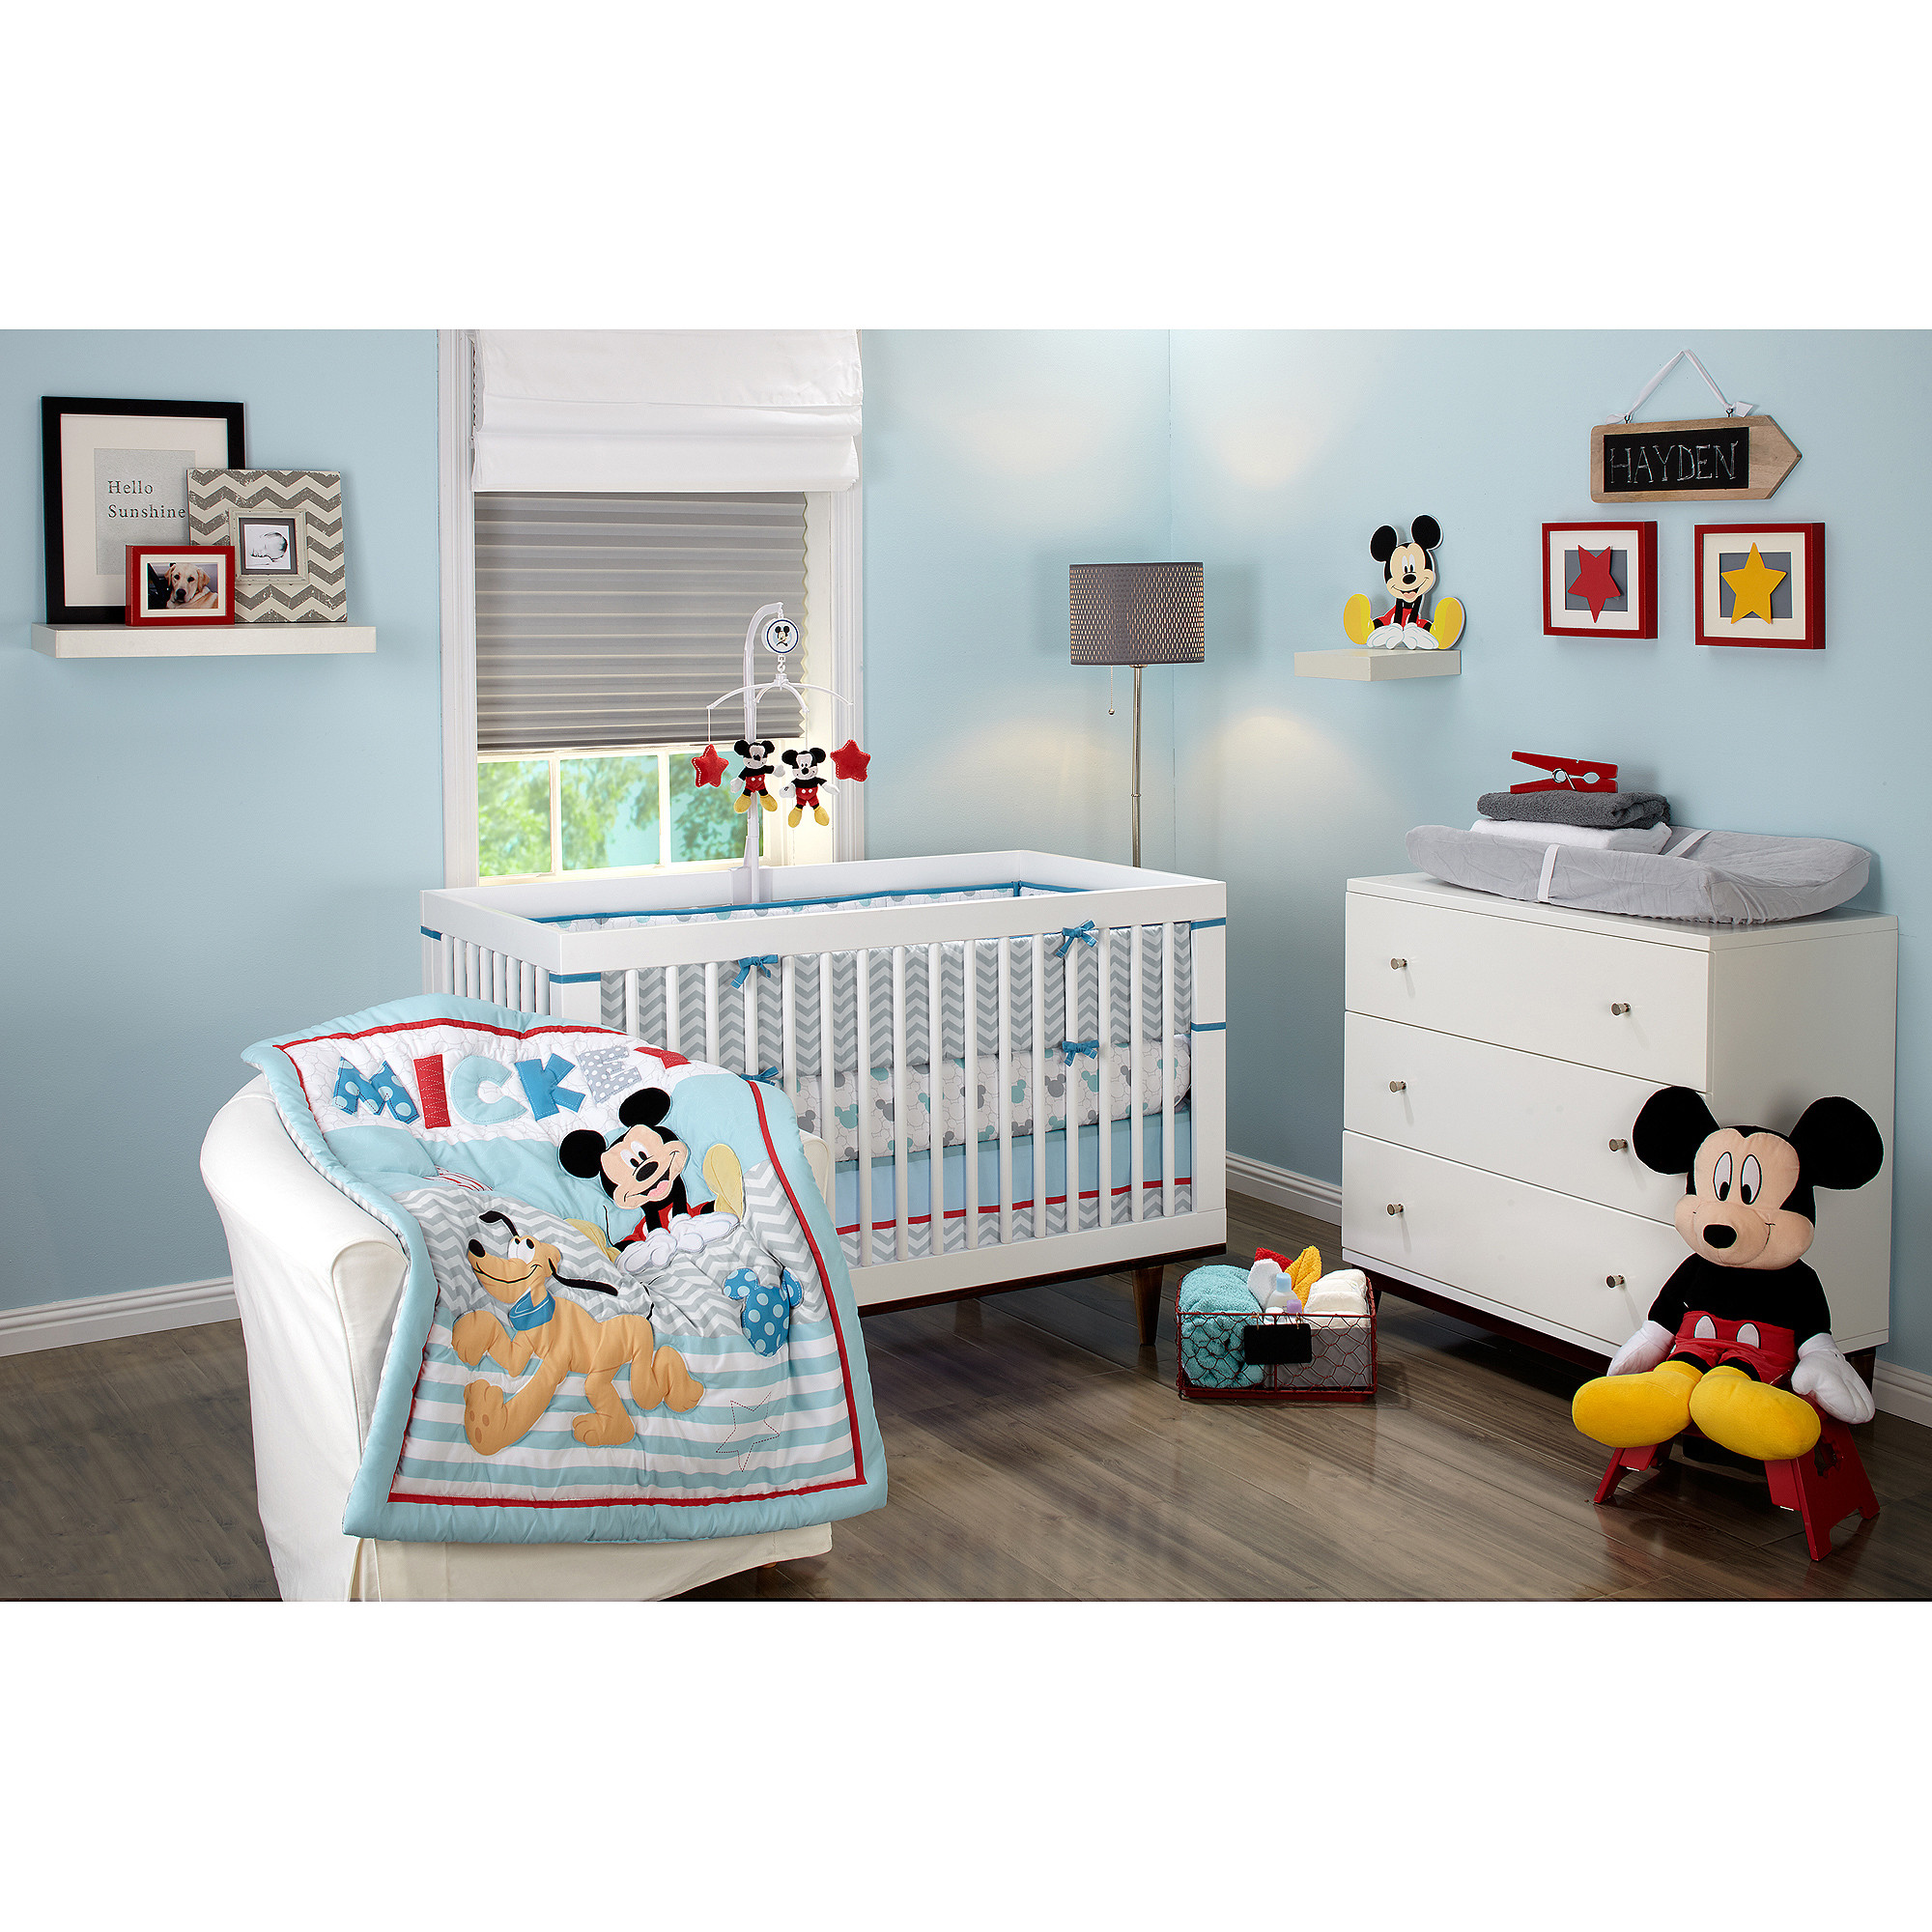 Mickey Mouse Room Decor For Baby
 Nursery Beautiful Mickey Mouse Crib Sheets Designs